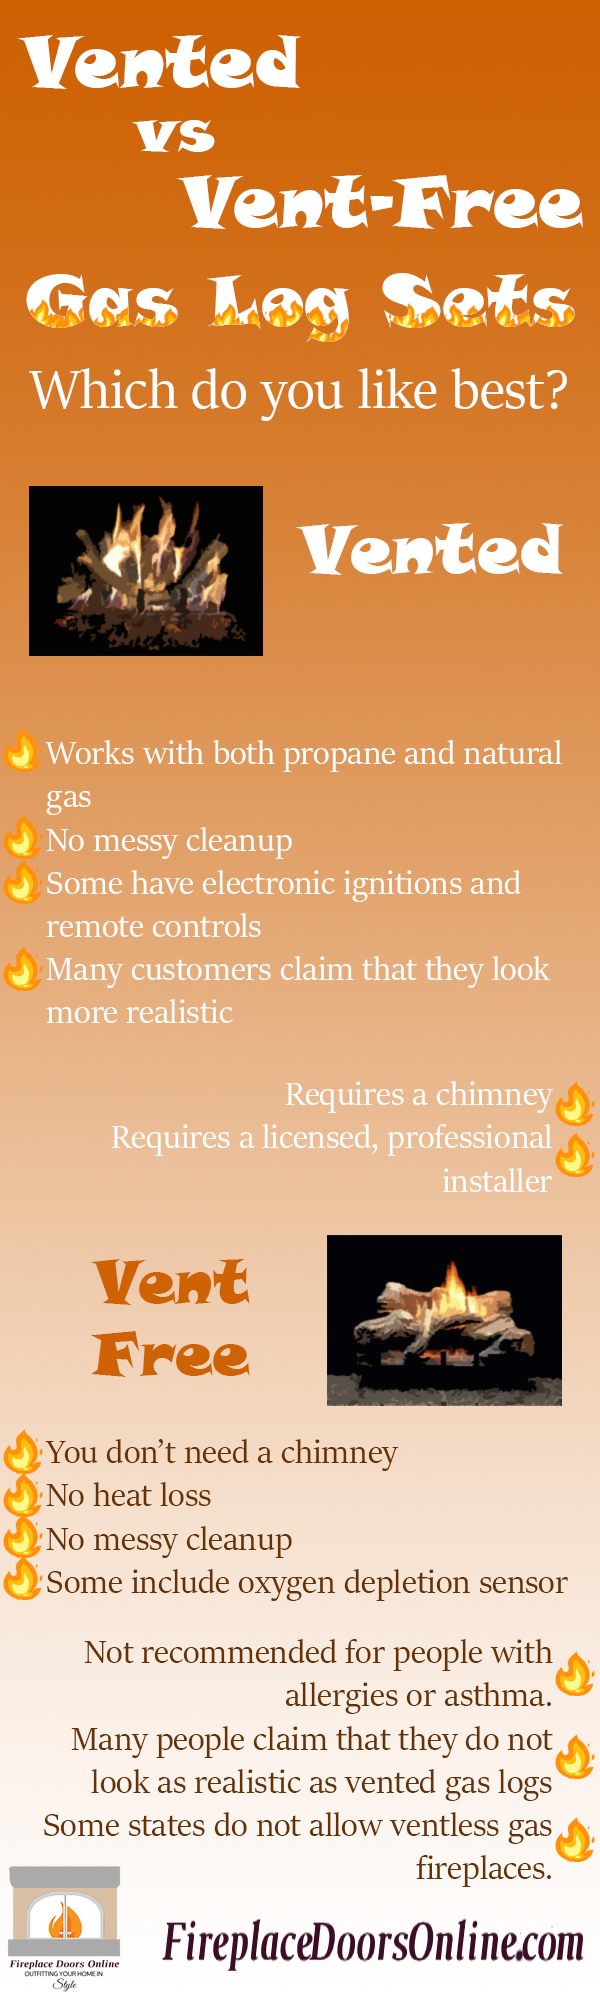 Gas Logs The Log Experts, Difference Between Vented And Ventless Gas Fireplaces